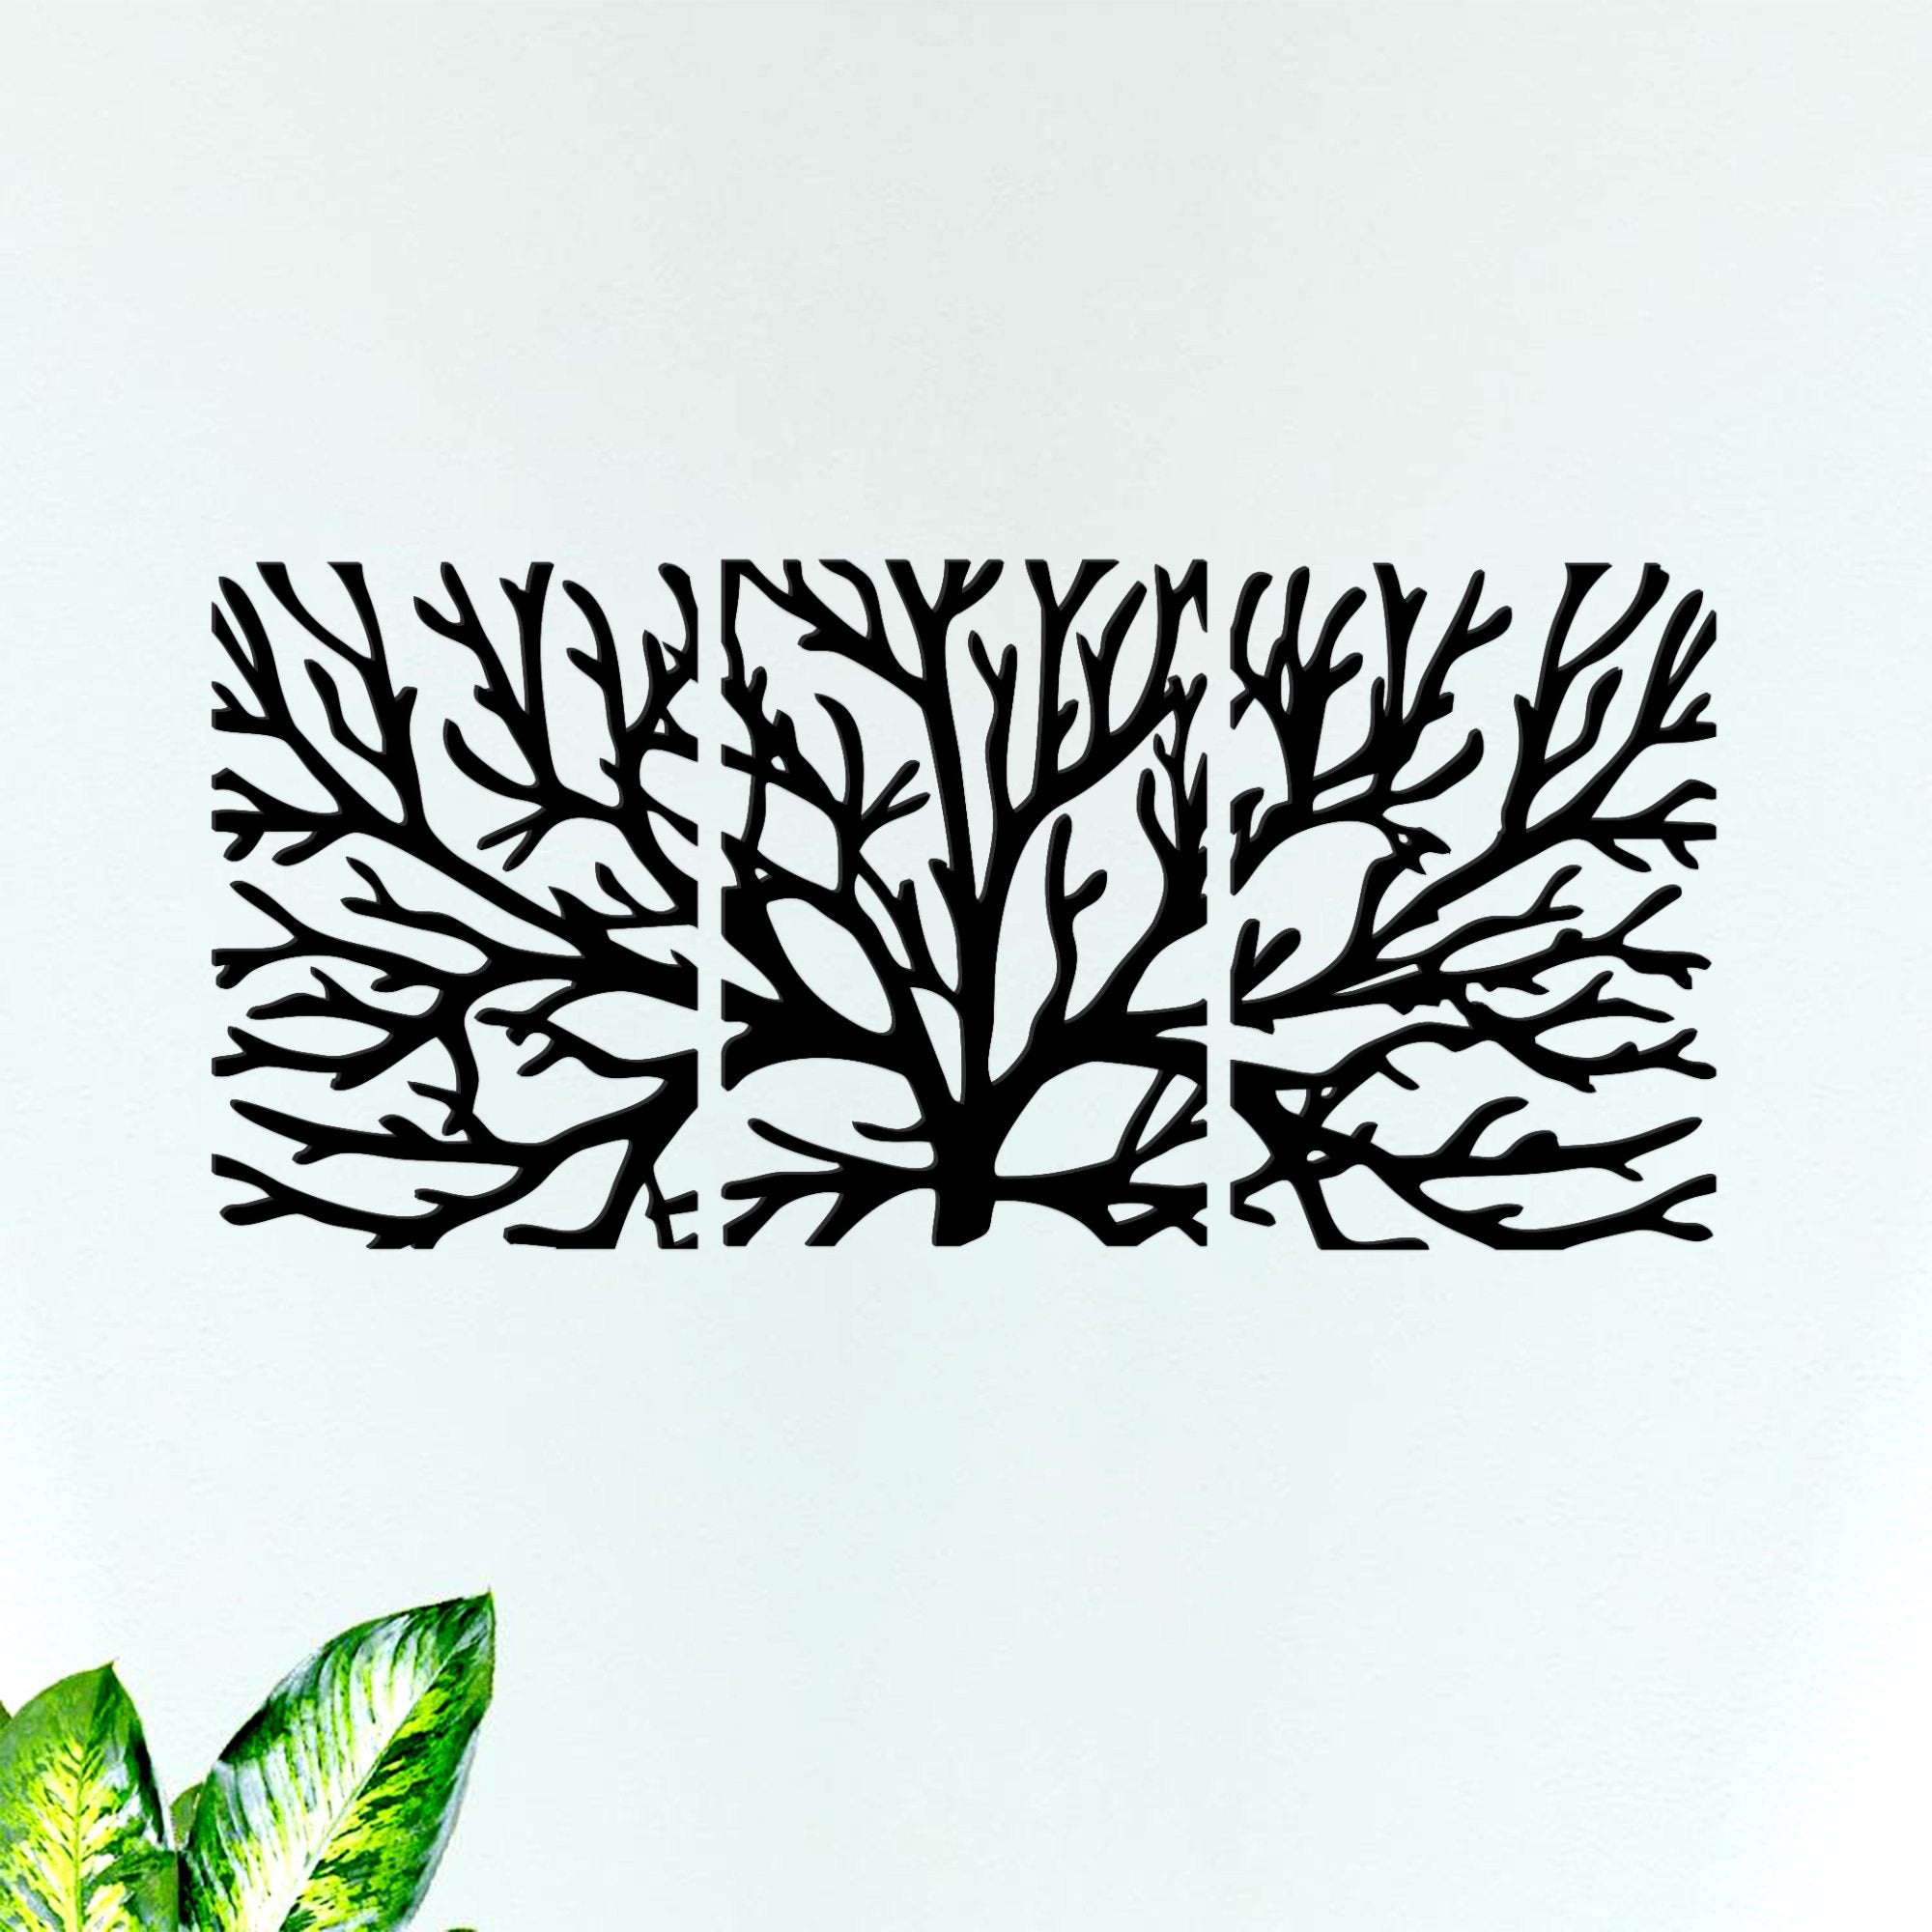  Wall Hanging of Beautiful Black Color Tree Branches